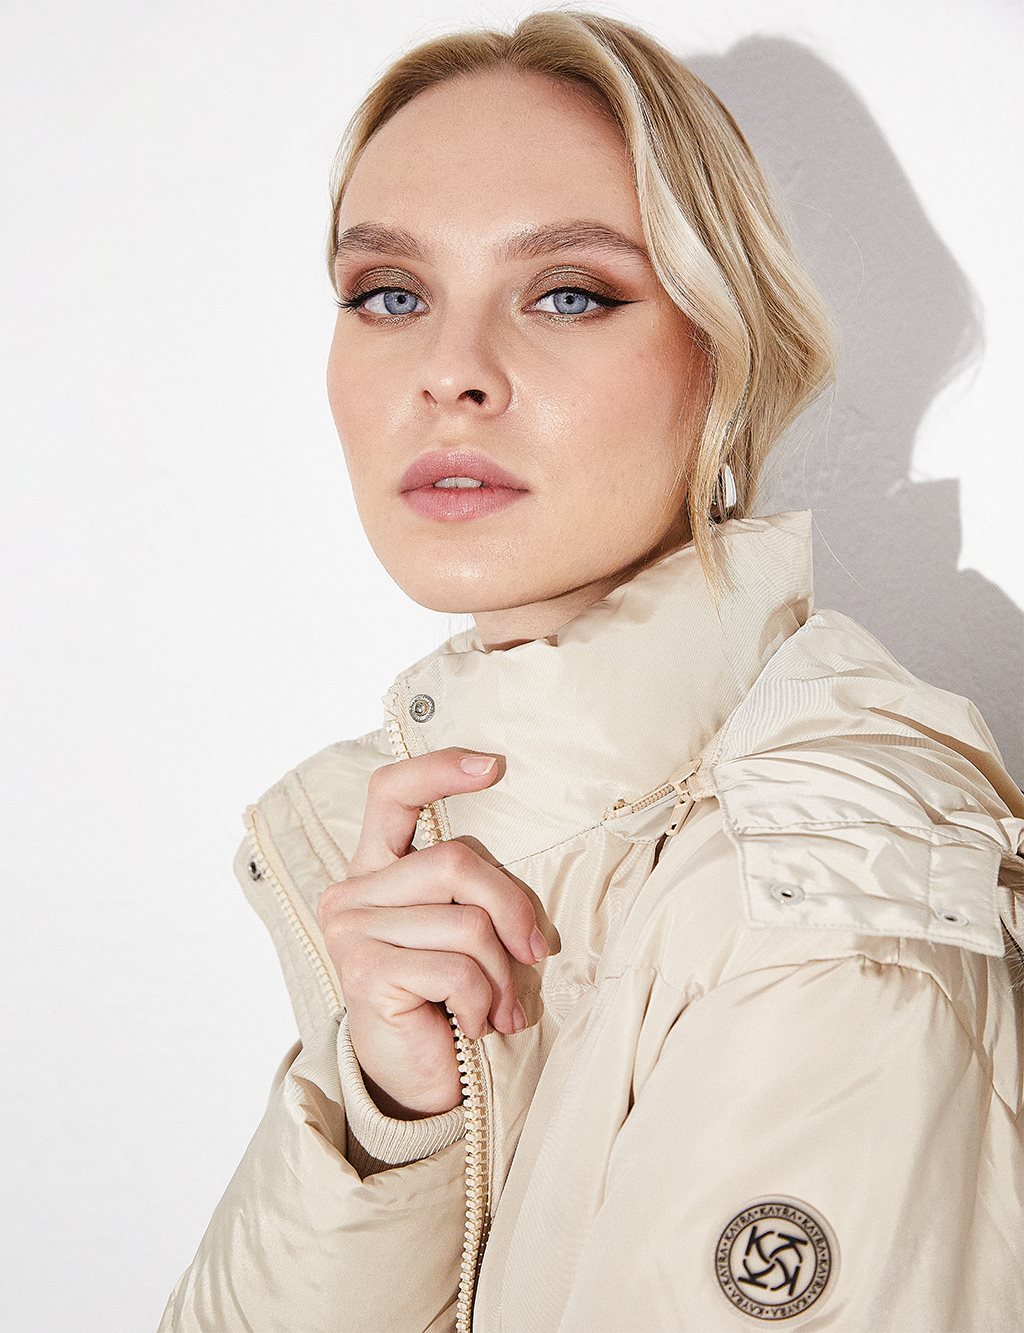 Quilted Stand Collar Hooded Fur Coat Cream